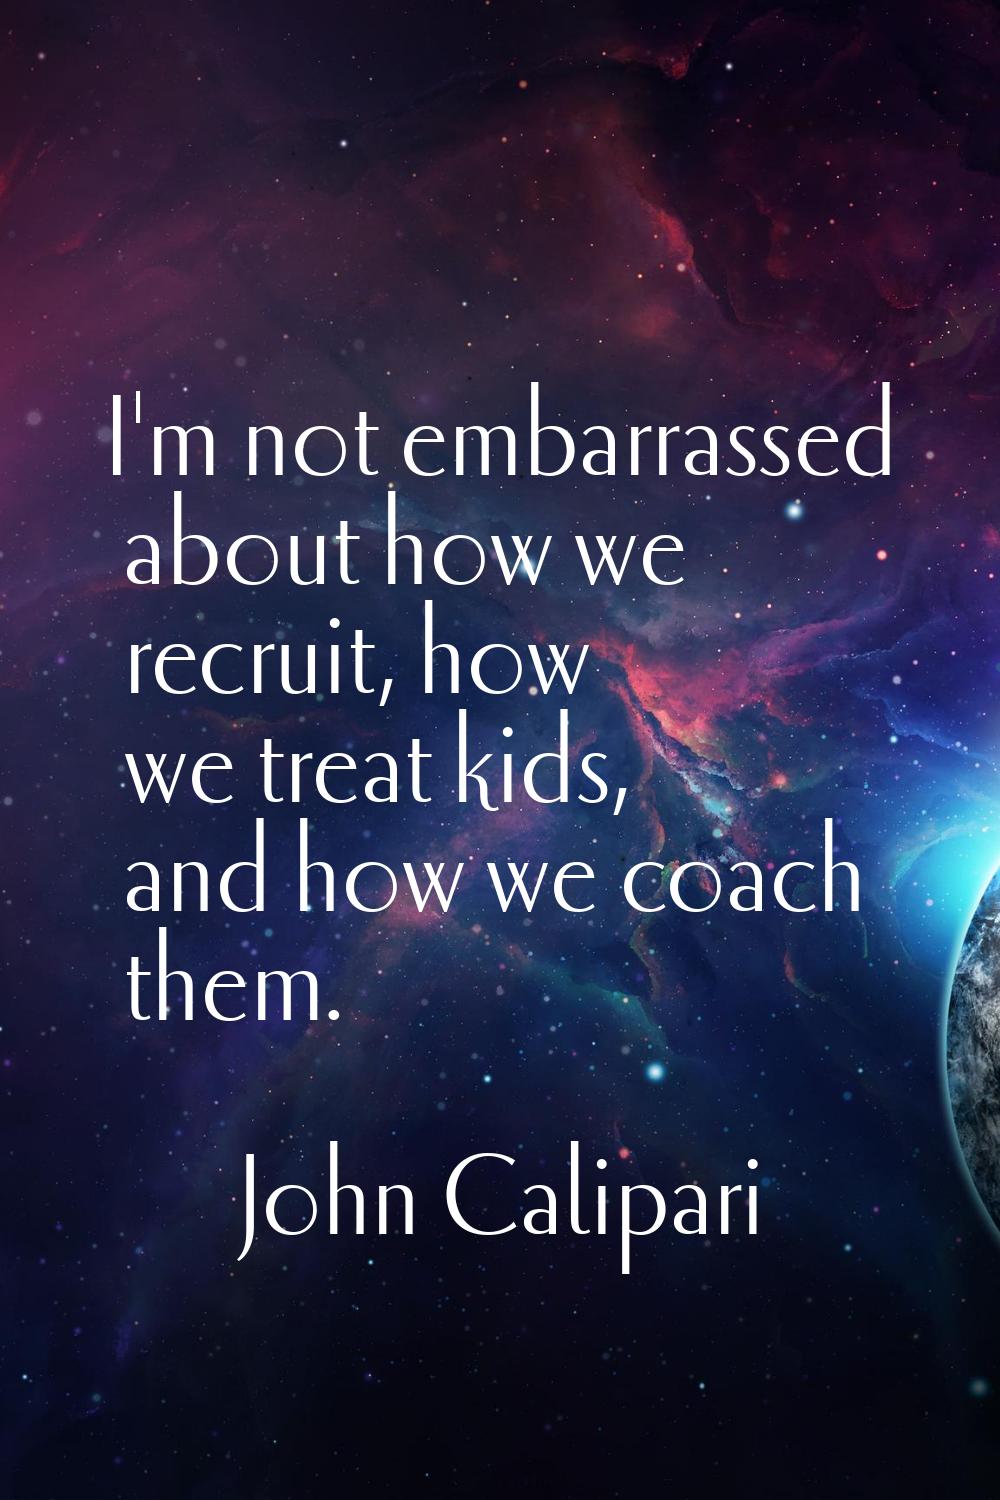 I'm not embarrassed about how we recruit, how we treat kids, and how we coach them.